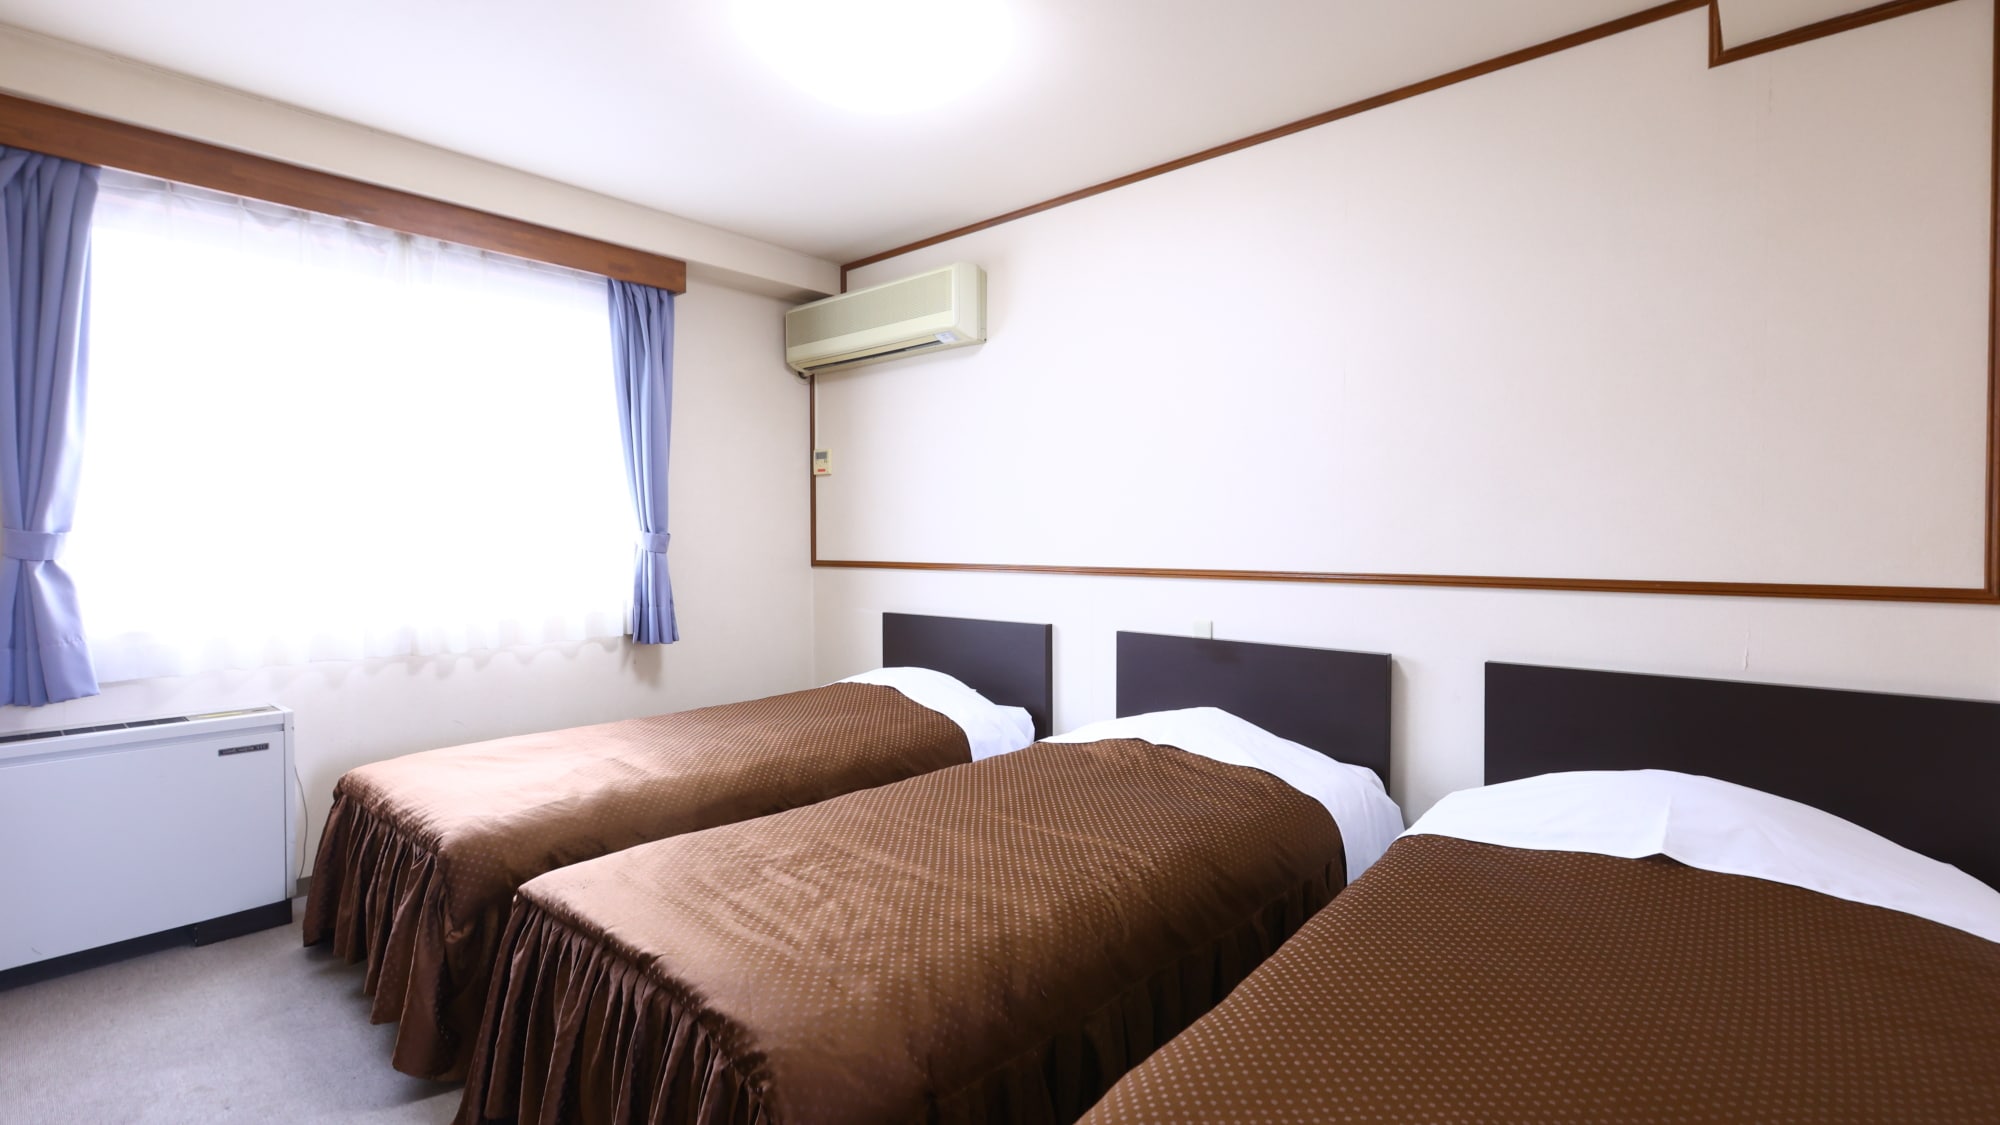 An example of a Western-style triple room. There are 3 regular beds so you can rest comfortably.